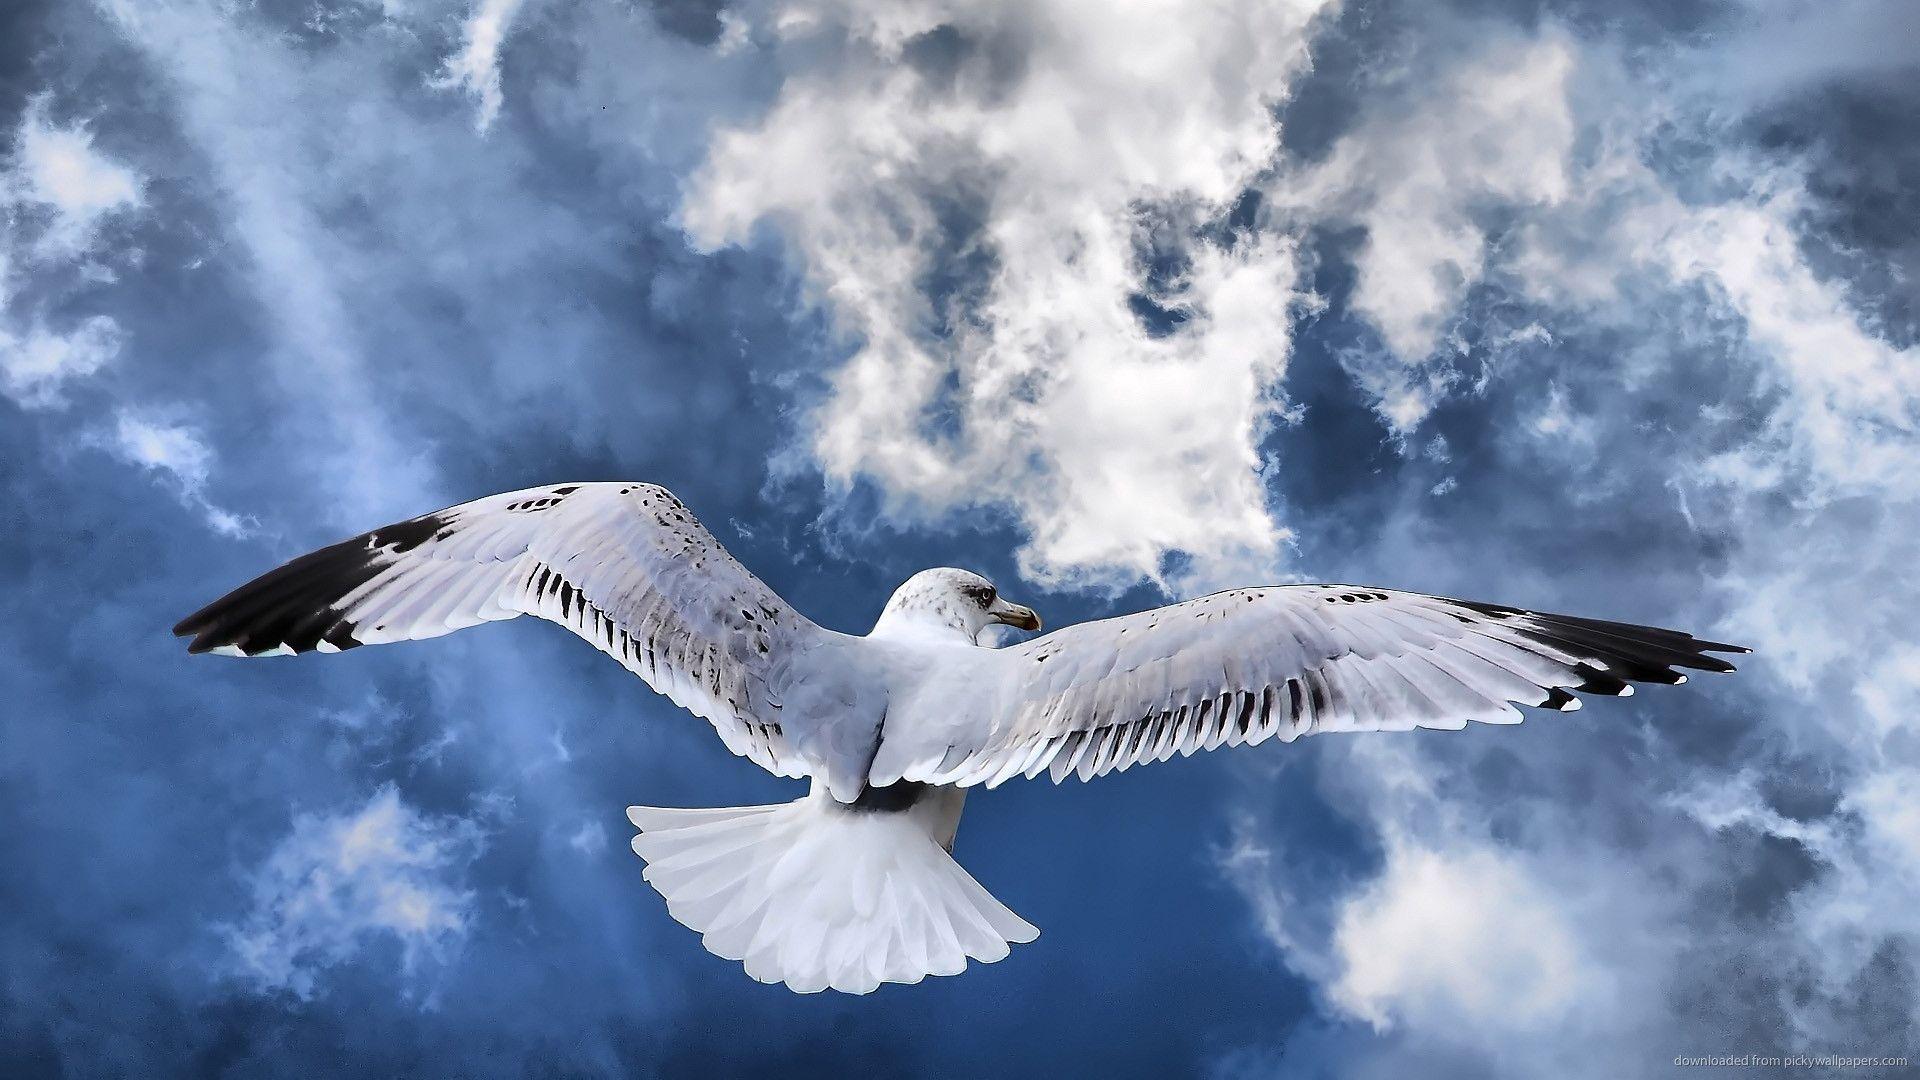 Seagull Cell Phone Wallpaper Images Free Download on Lovepik  400594914